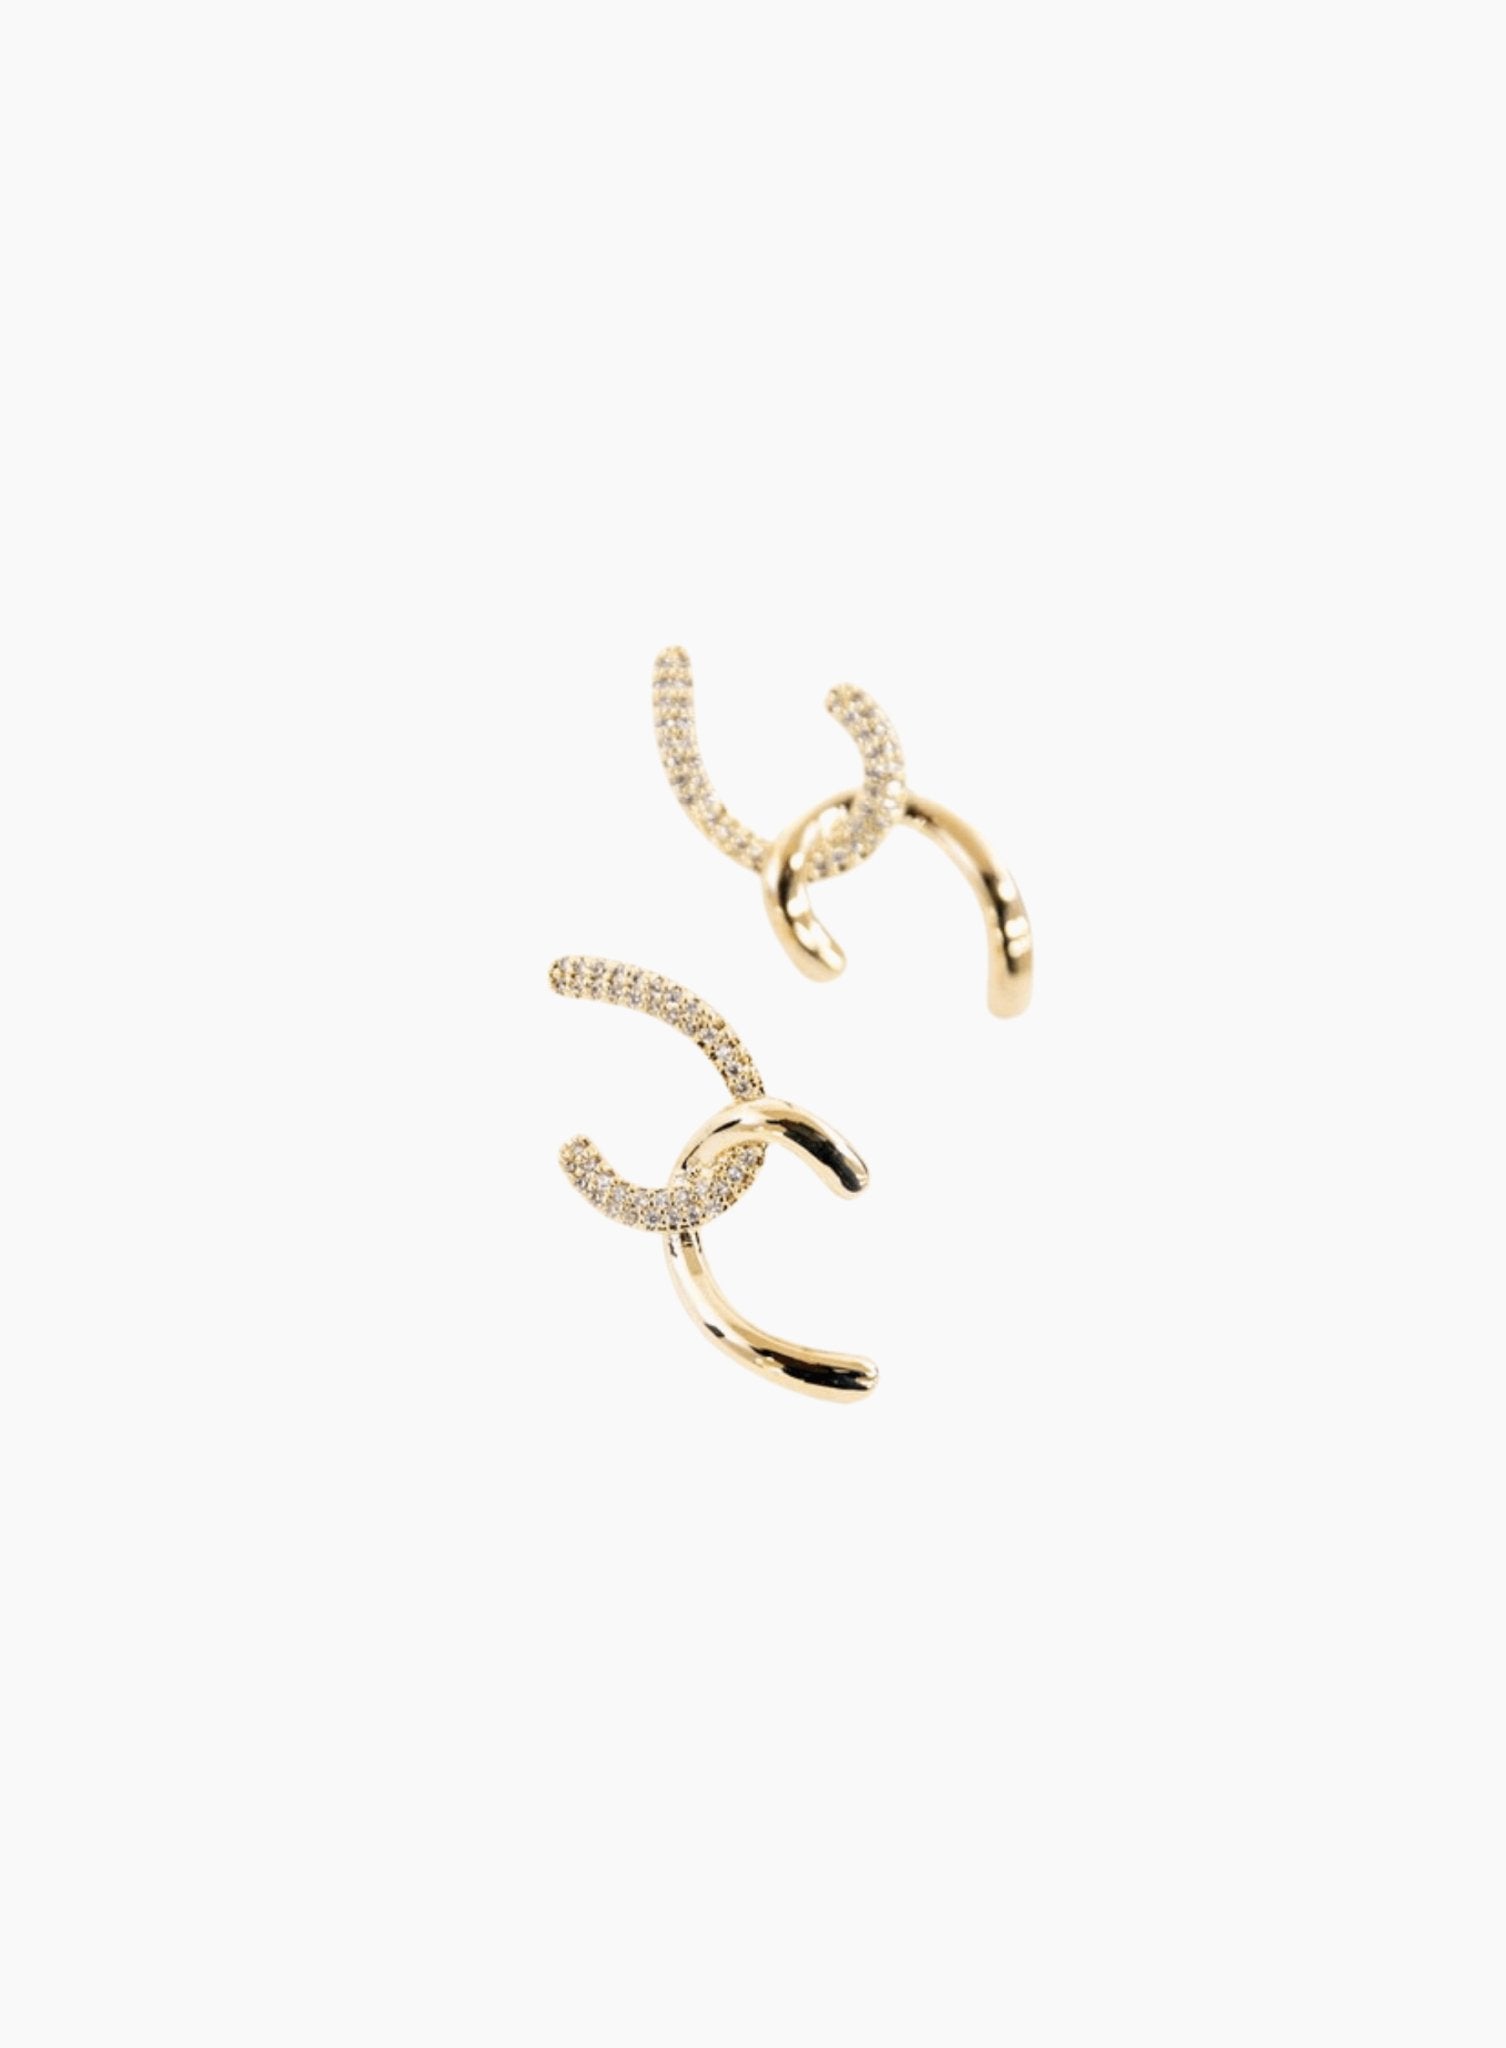 Connection Earrings - Rocca & Co